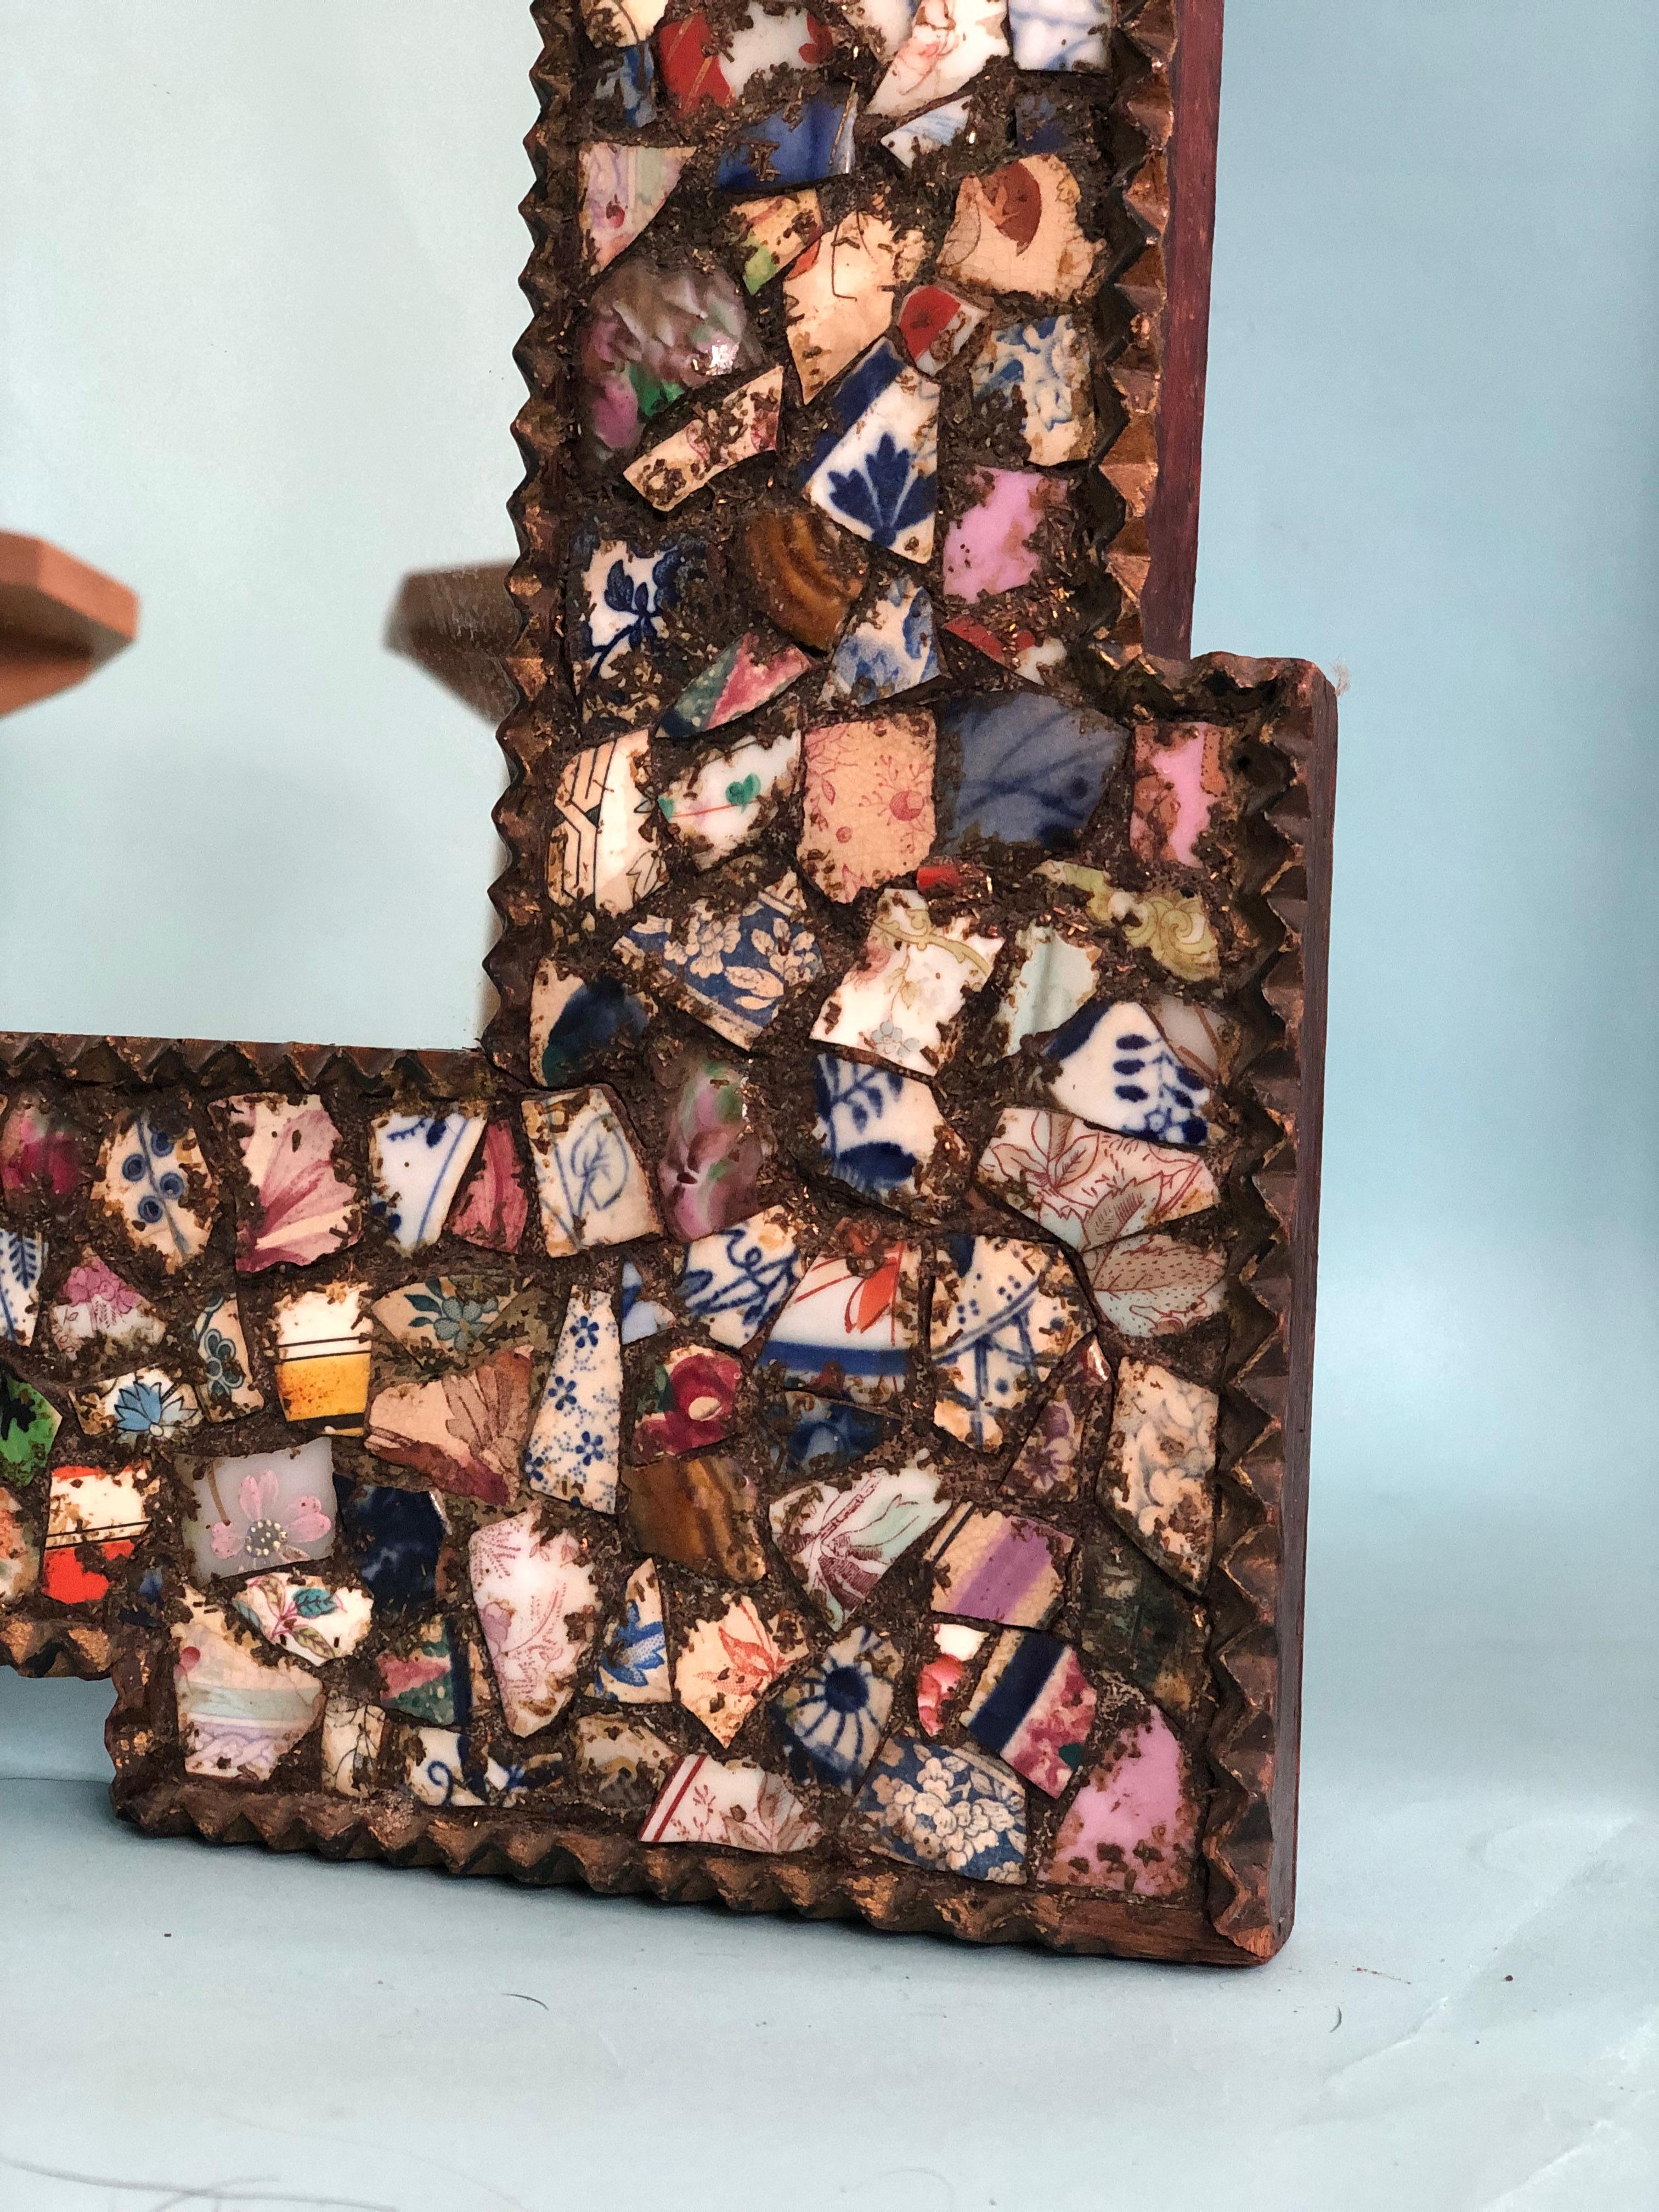 A pair handcrafted mirrors decorated with broken crockery. The colorful mosaic mirrors are decorated with all kinds of crockery and filled with gilt. The wooden edge of the frame has been carved.

Beautifully handmade and richly decorated mirror In